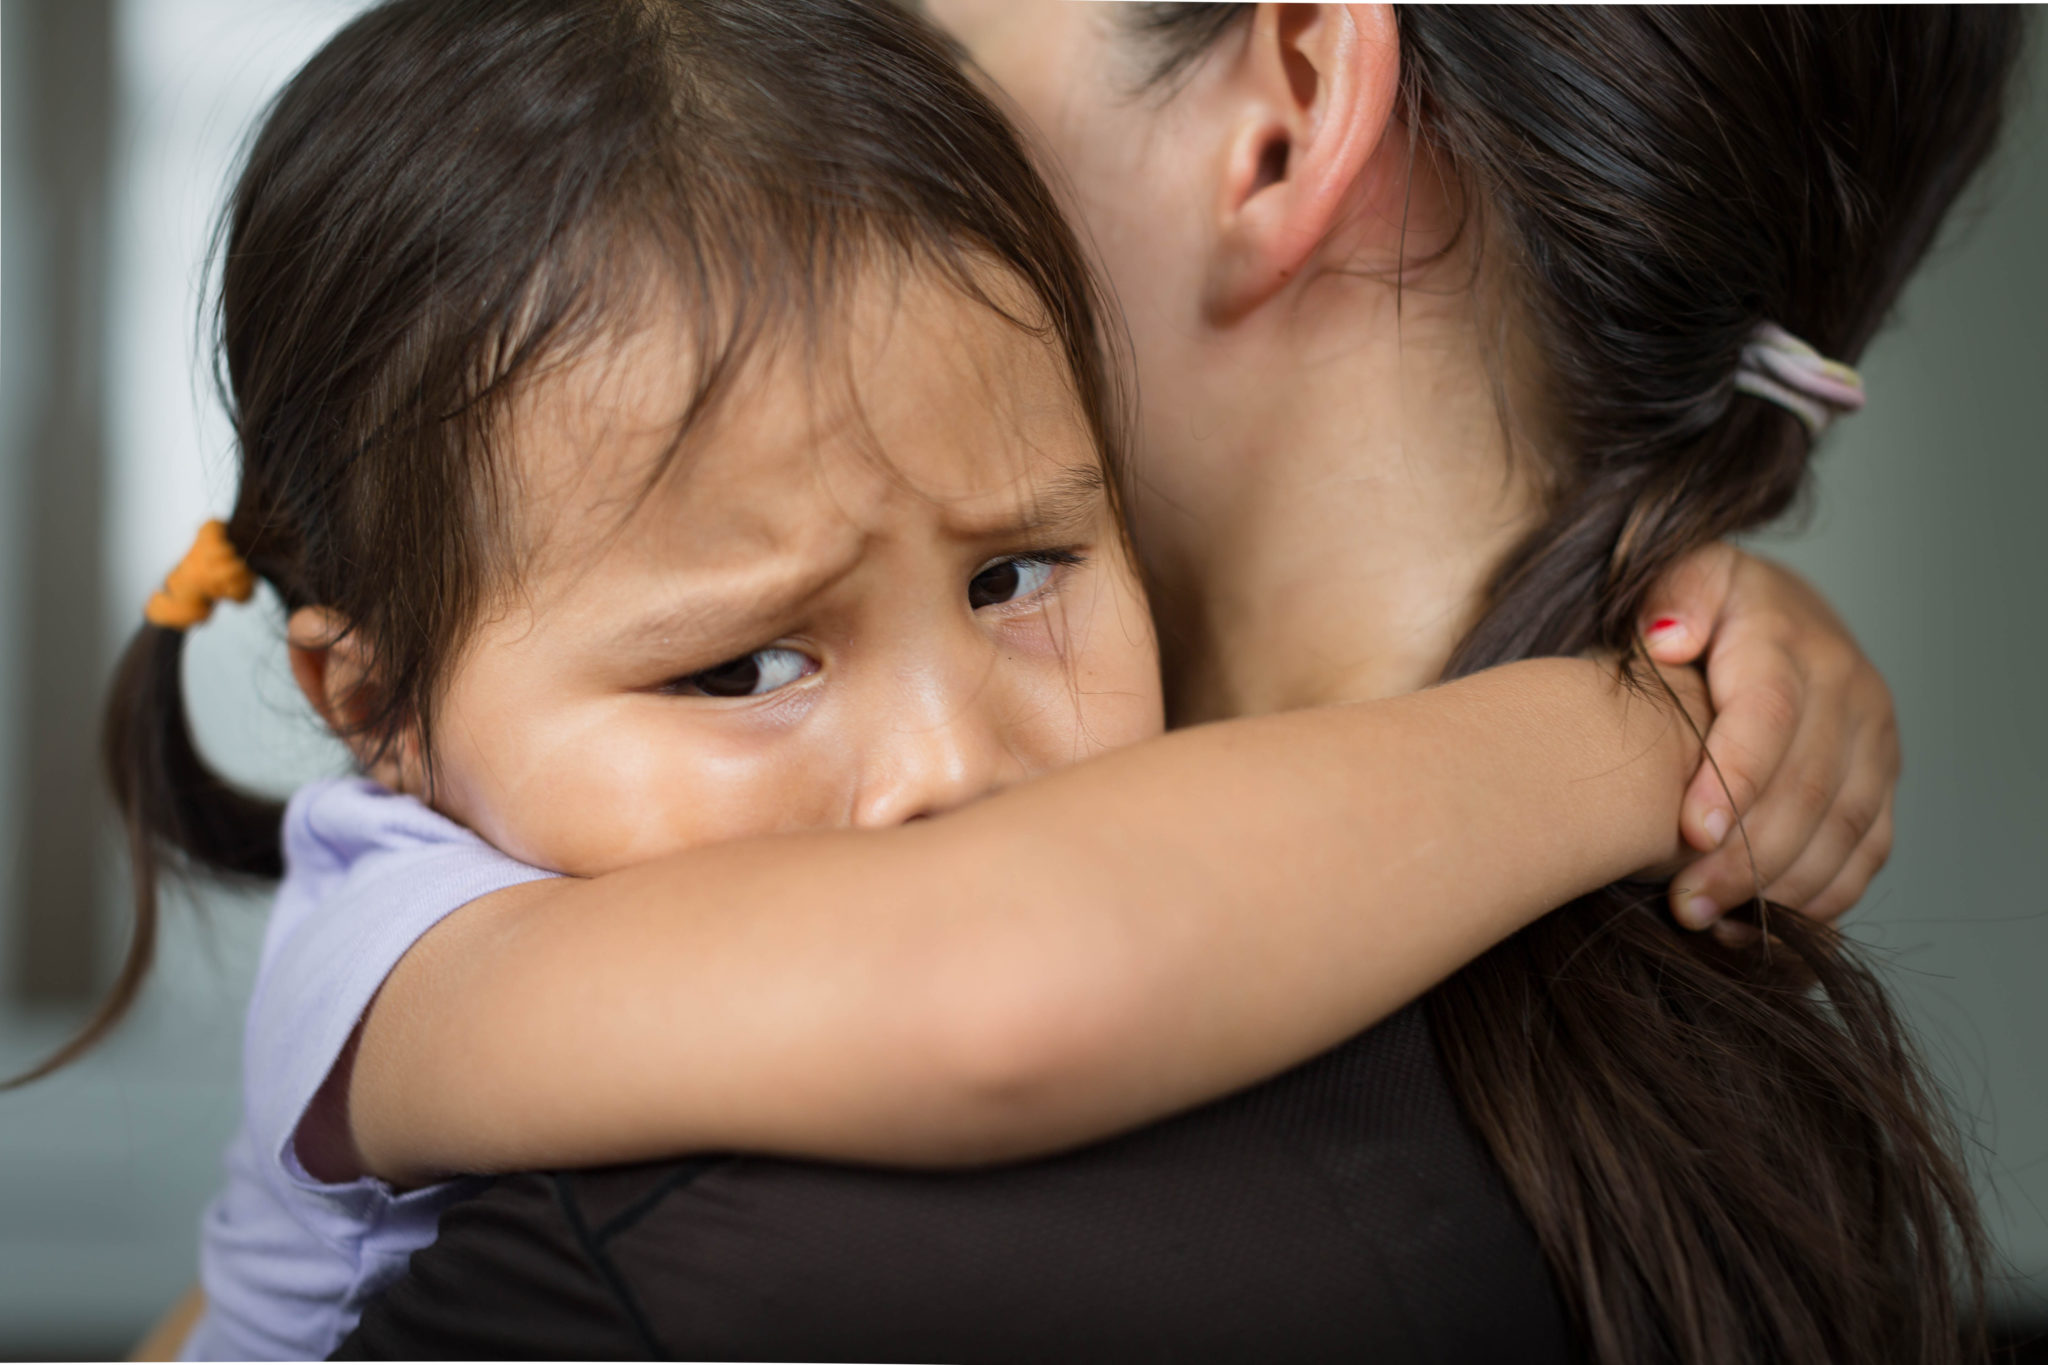 Dealing With Daycare Separation Anxiety? Here Are Some